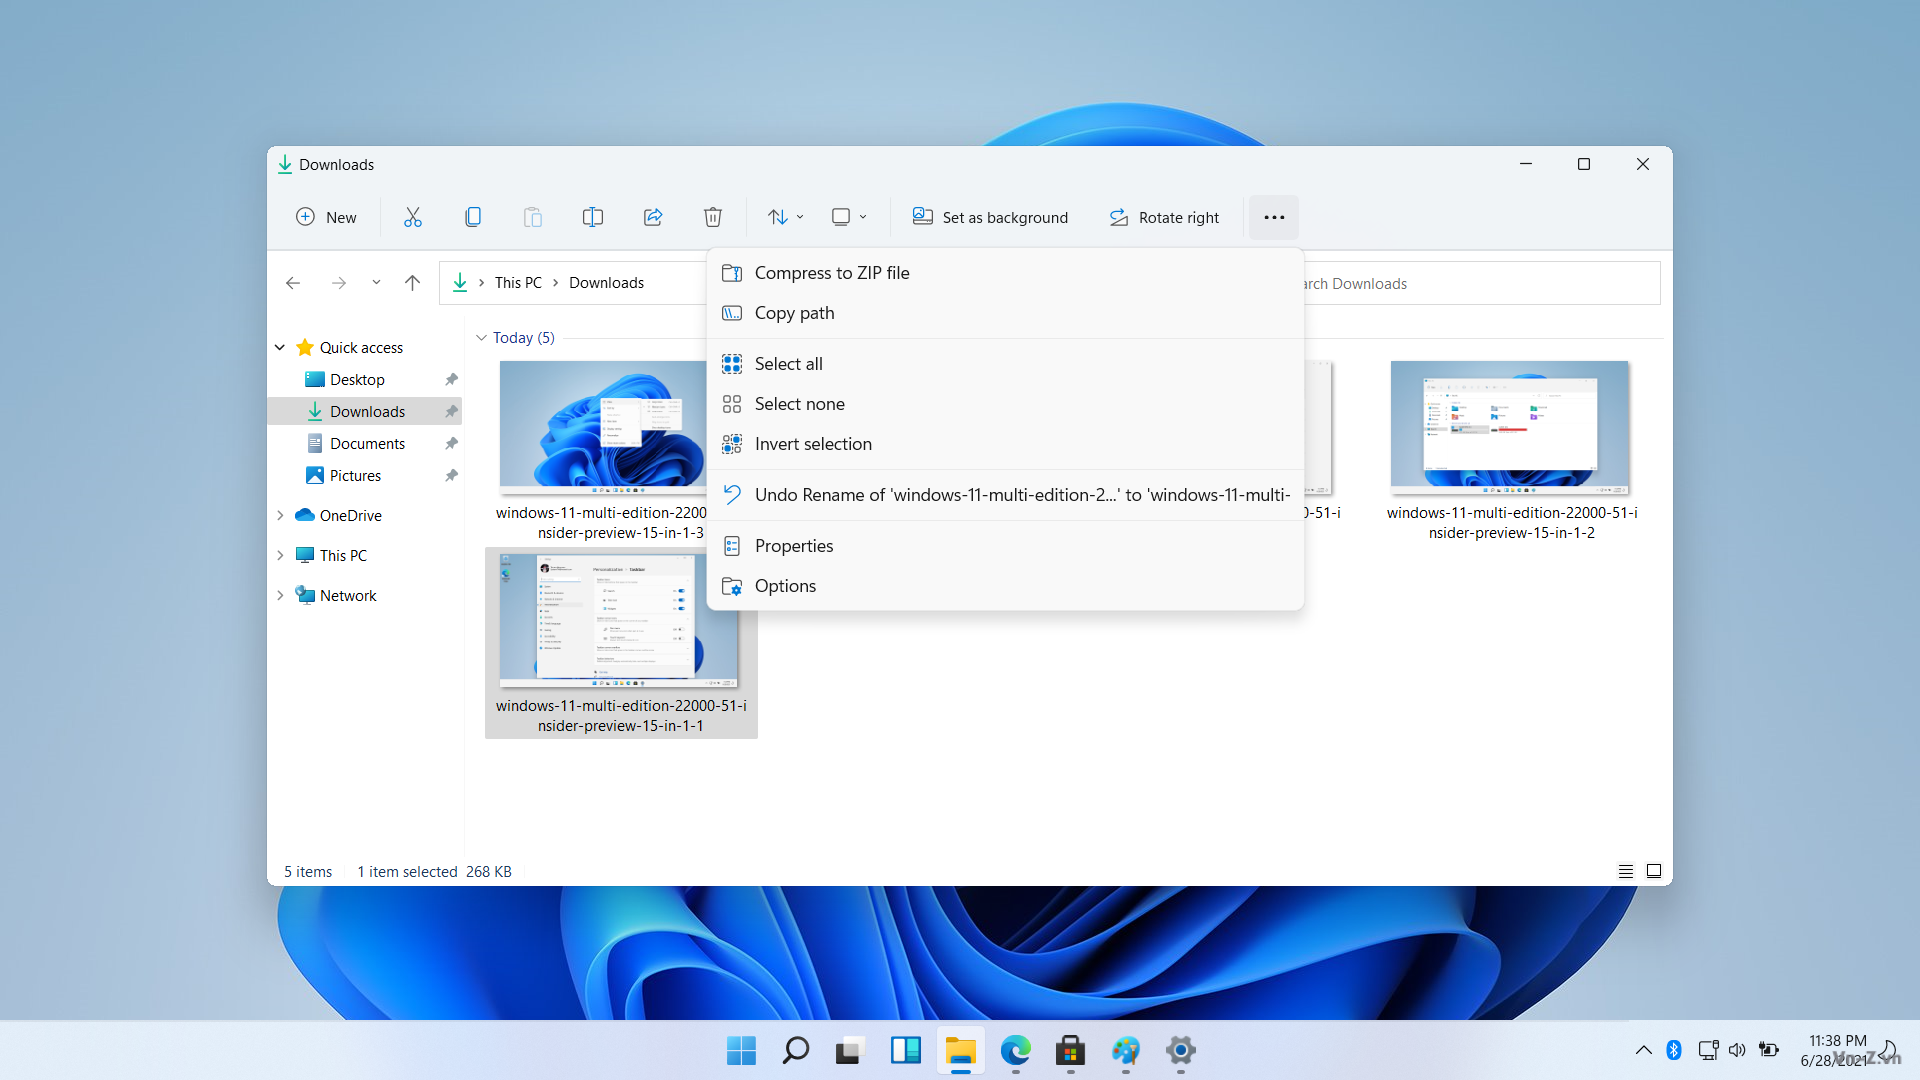 windows-11-multi-edition-22000-51-insider-preview-15-in-1-535d5df8e39dc571f.png